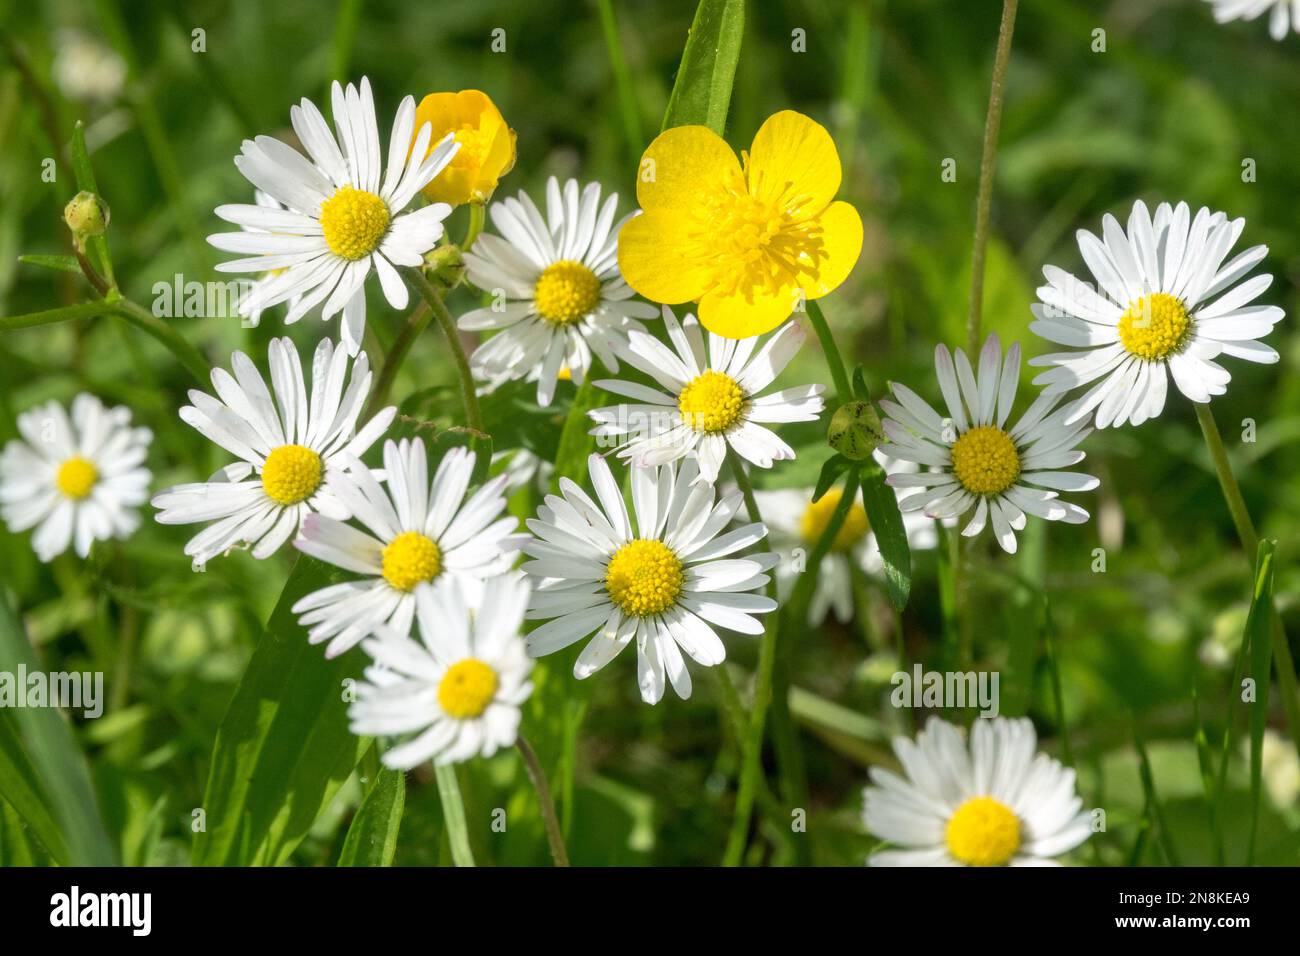 White yellow lawn wildflowers Common Daisy Creeping buttercup Bellis perennis Ranunculus flower Stock Photo